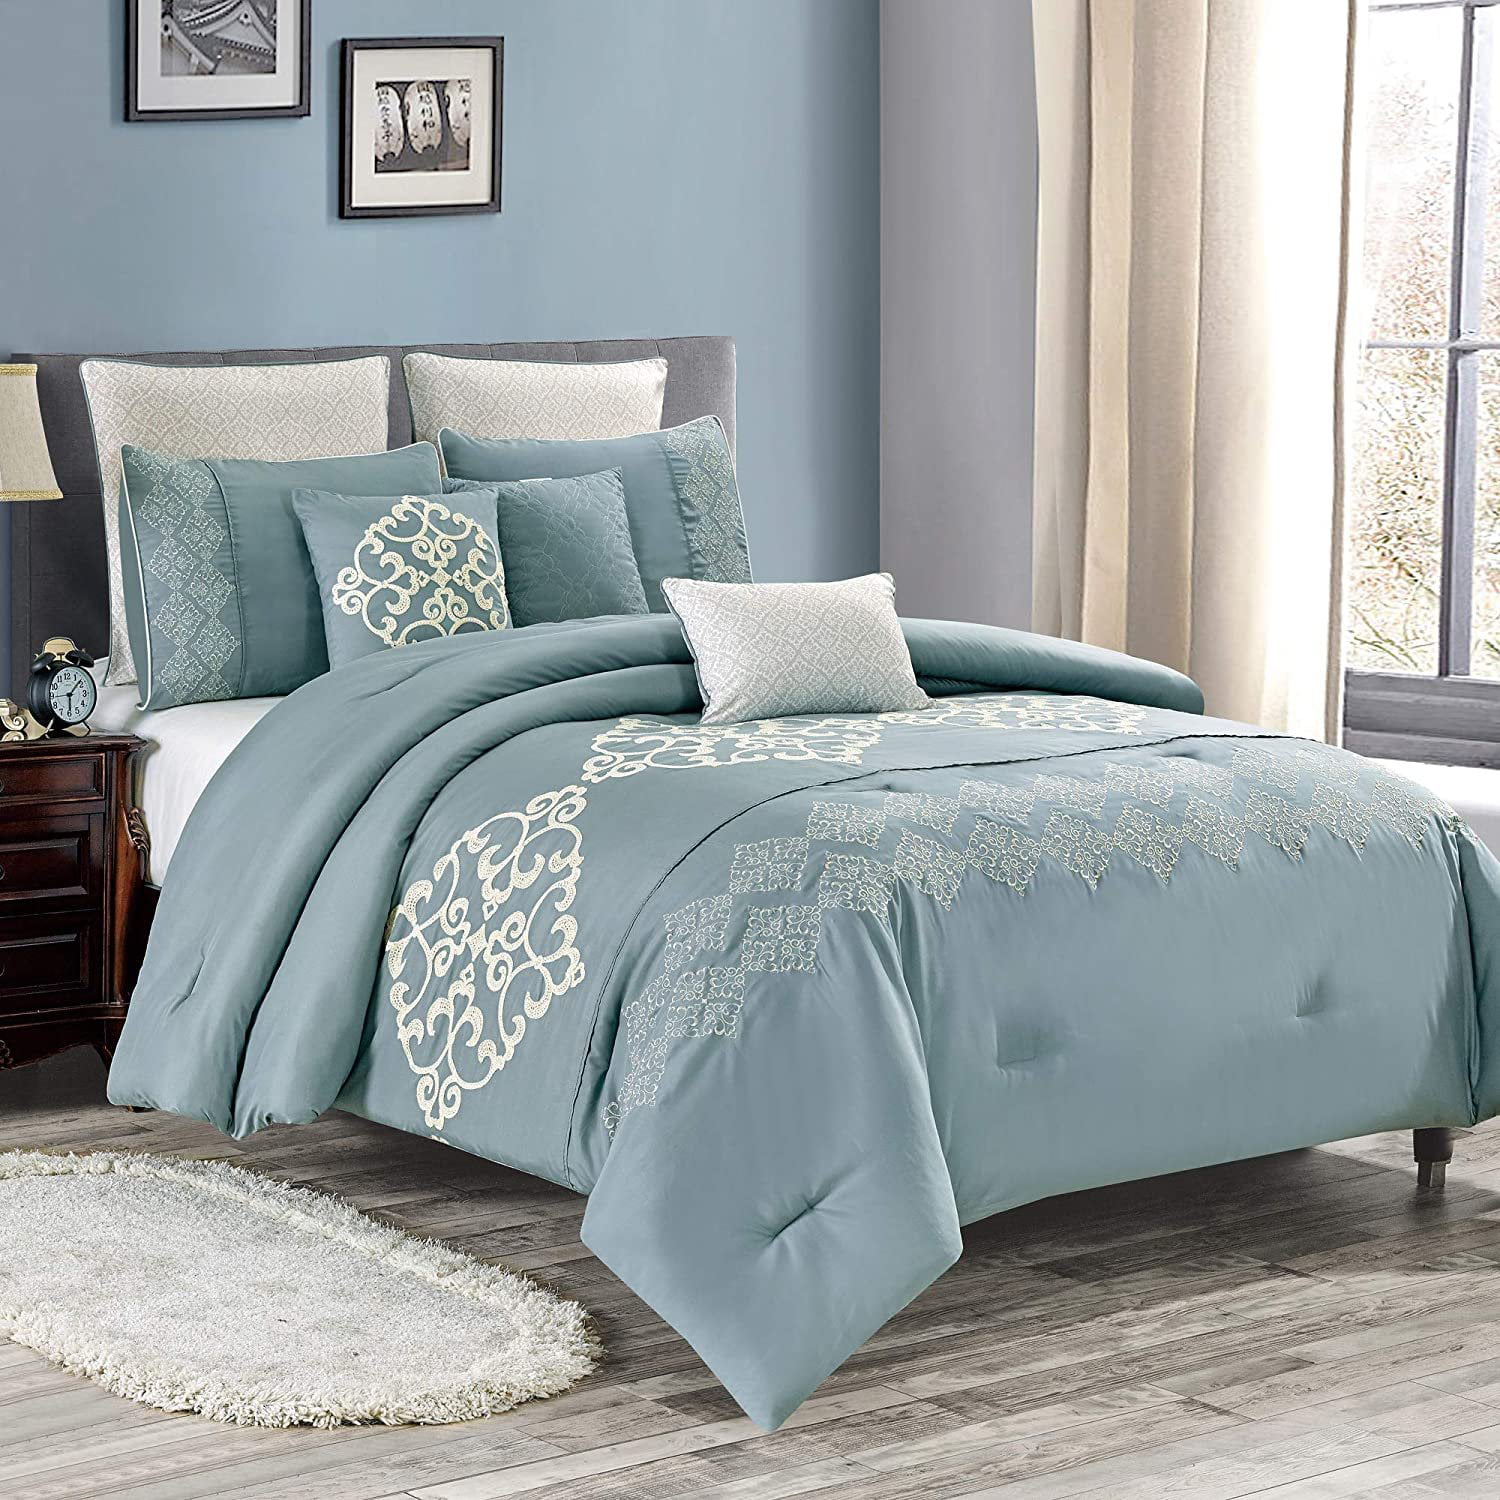 Sapphire Home Luxury 8 Piece Fullqueen Comforter Set With Shams And